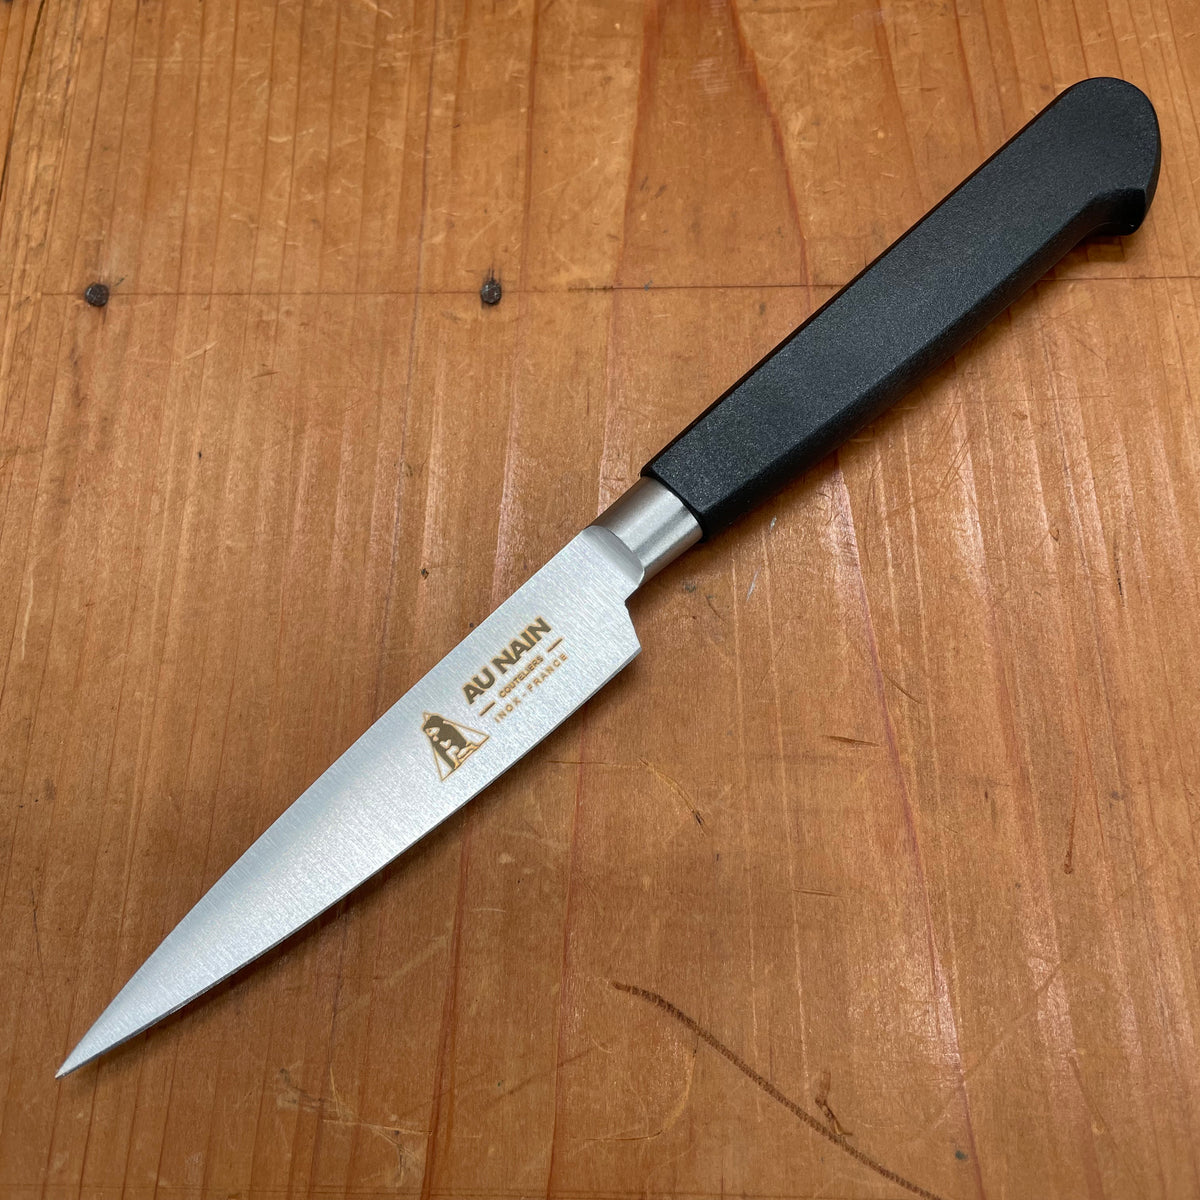 Au Nain 3.5" Paring Stainless Steel and Black Molded Handle